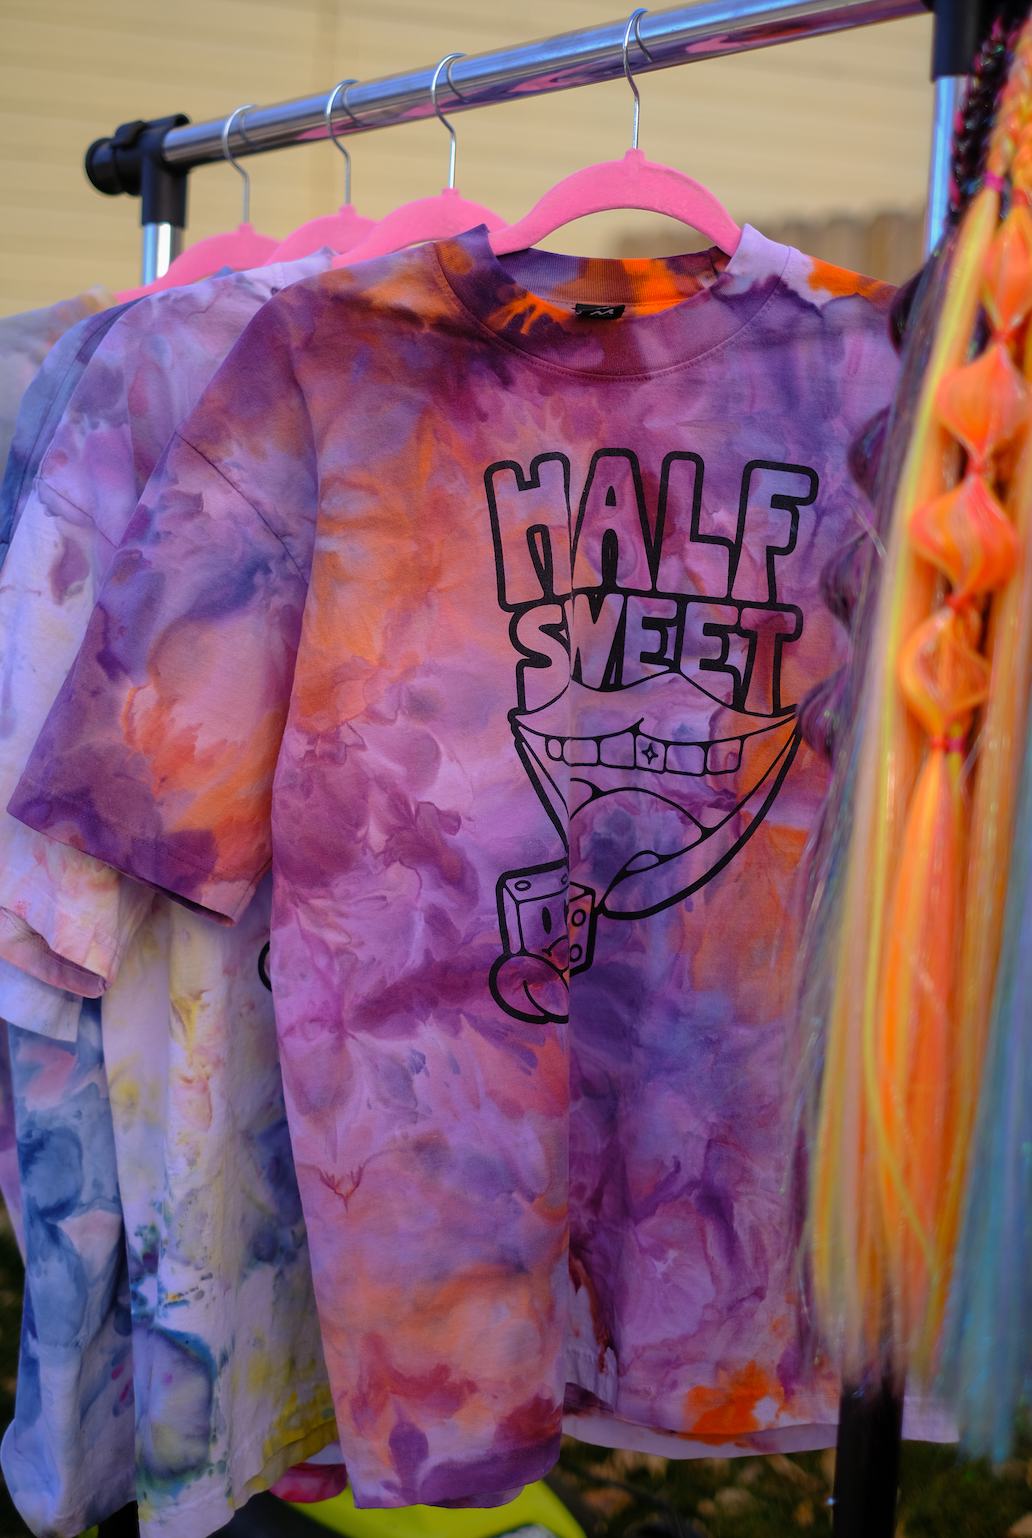 Half Sweet x Vision Bored Hand Dyed Mystery Tee